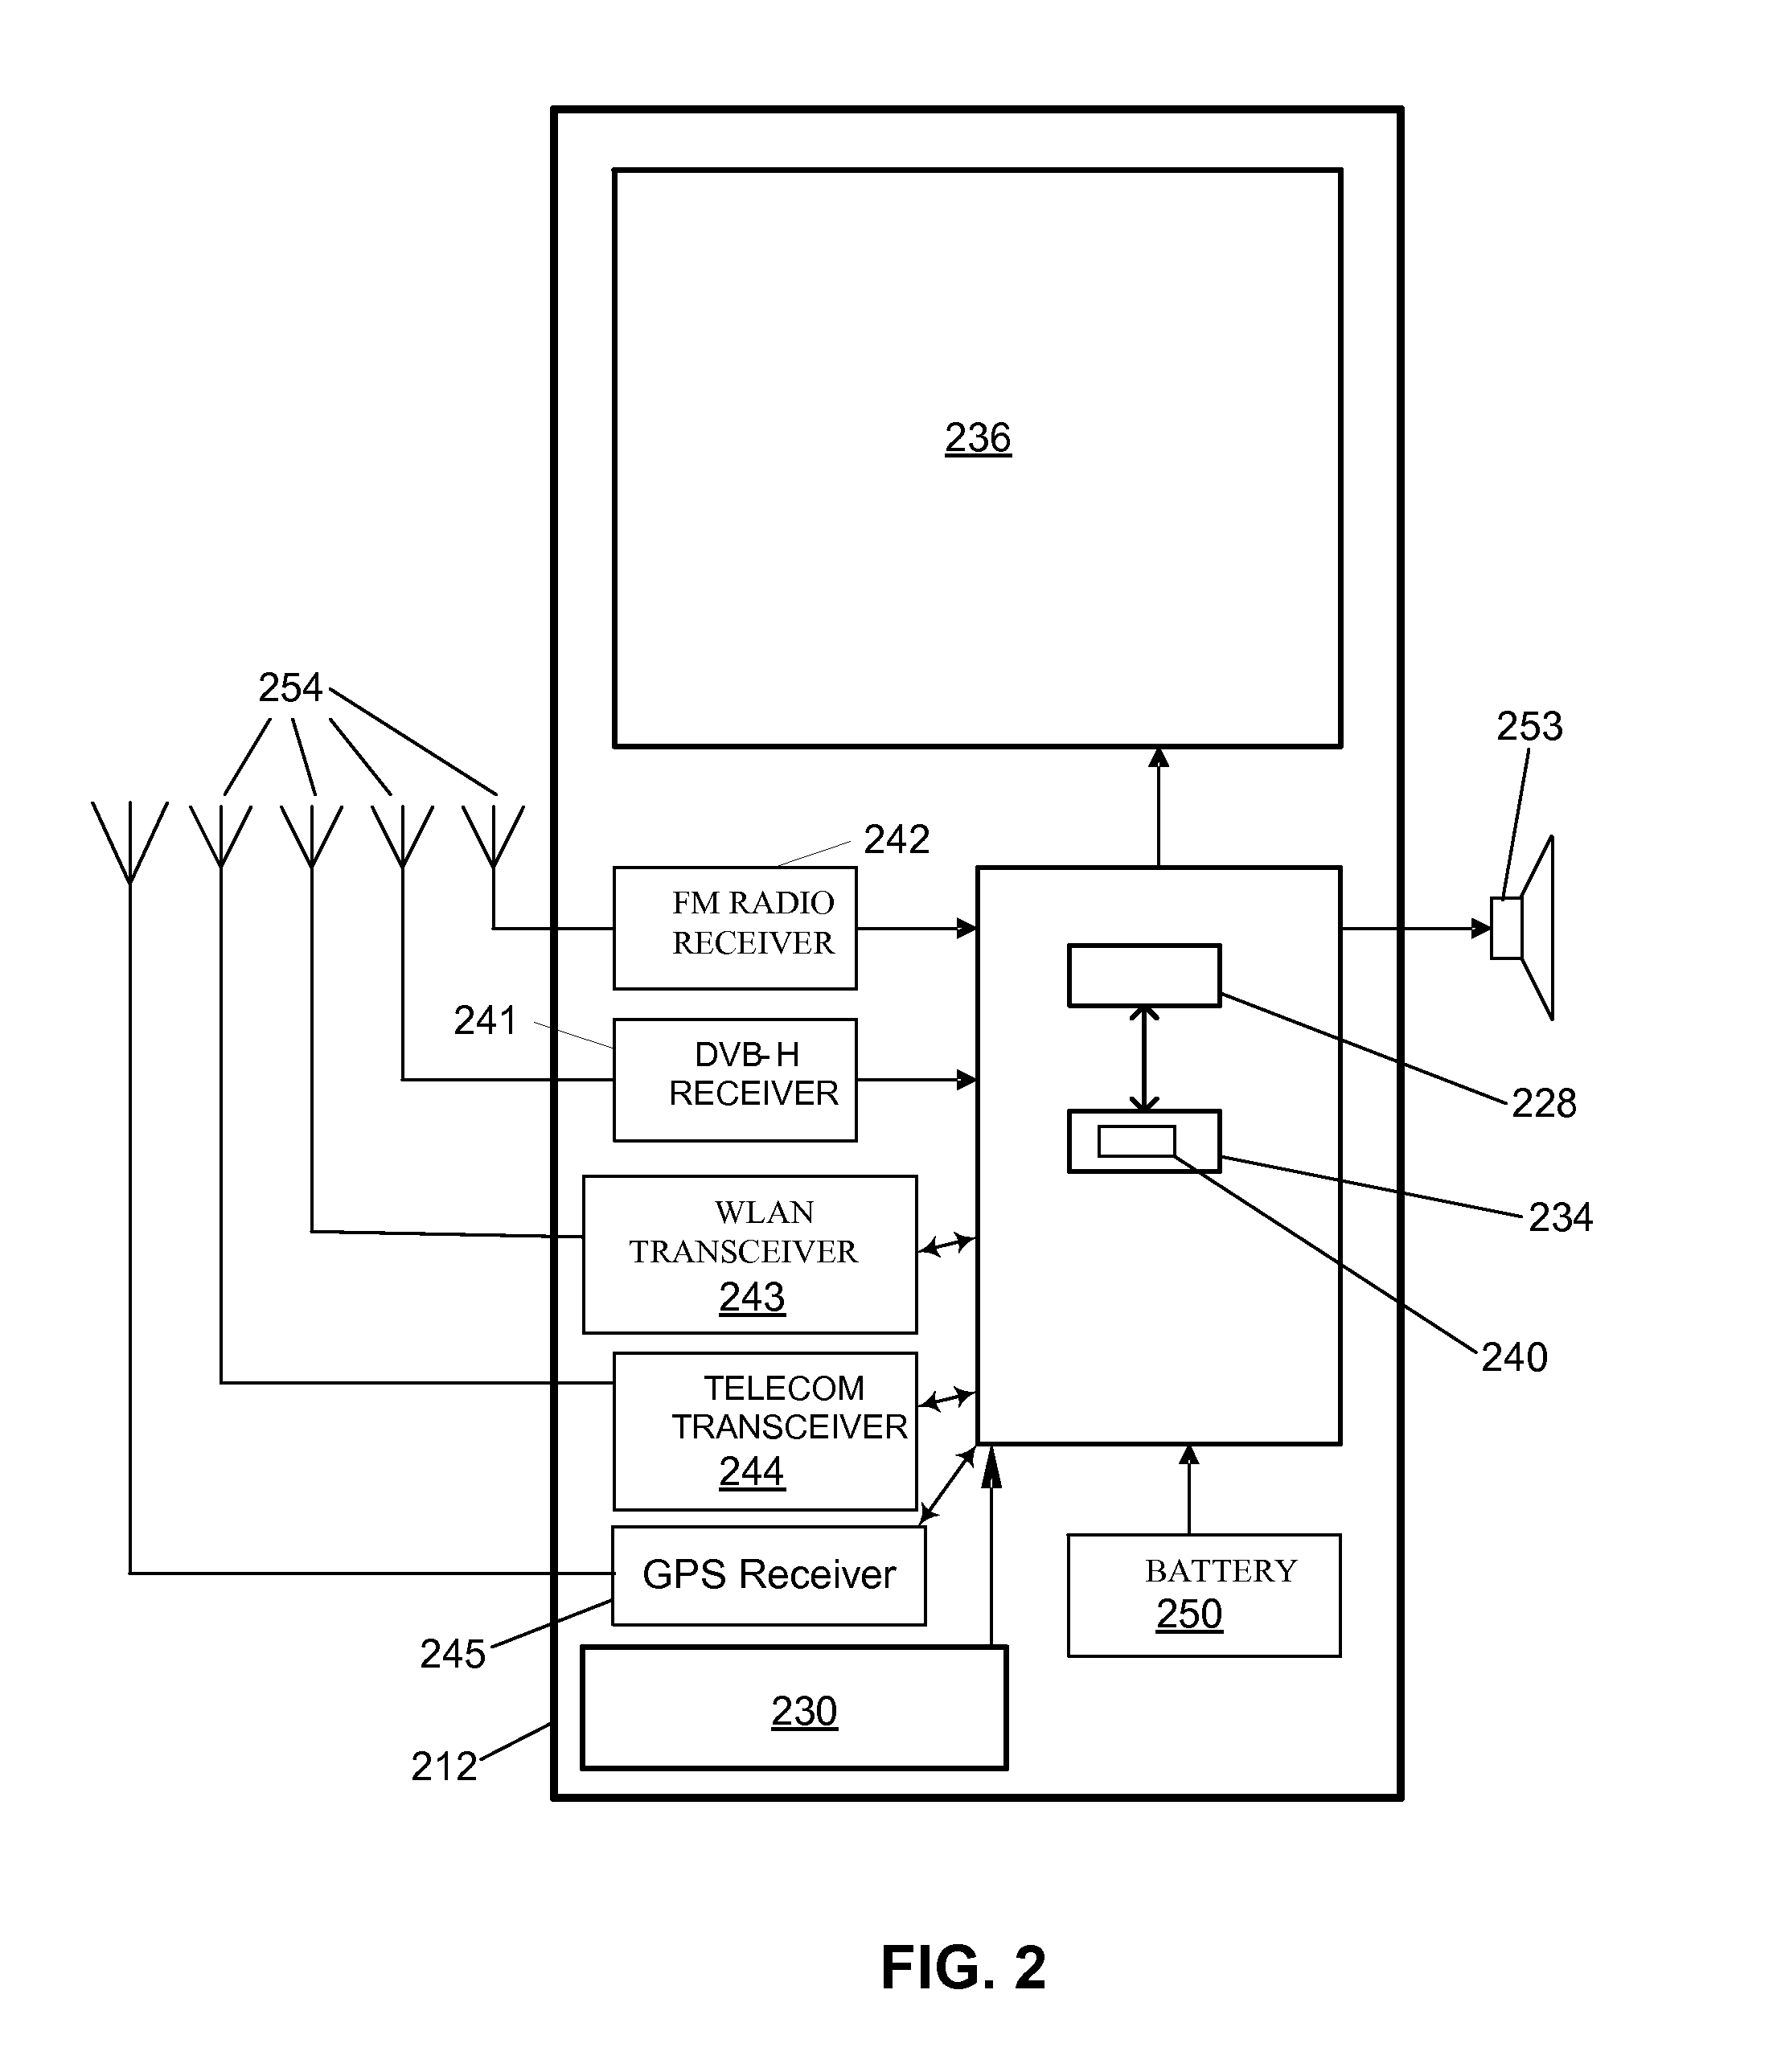 Systems and Methods for Facilitating Electronic Commerce